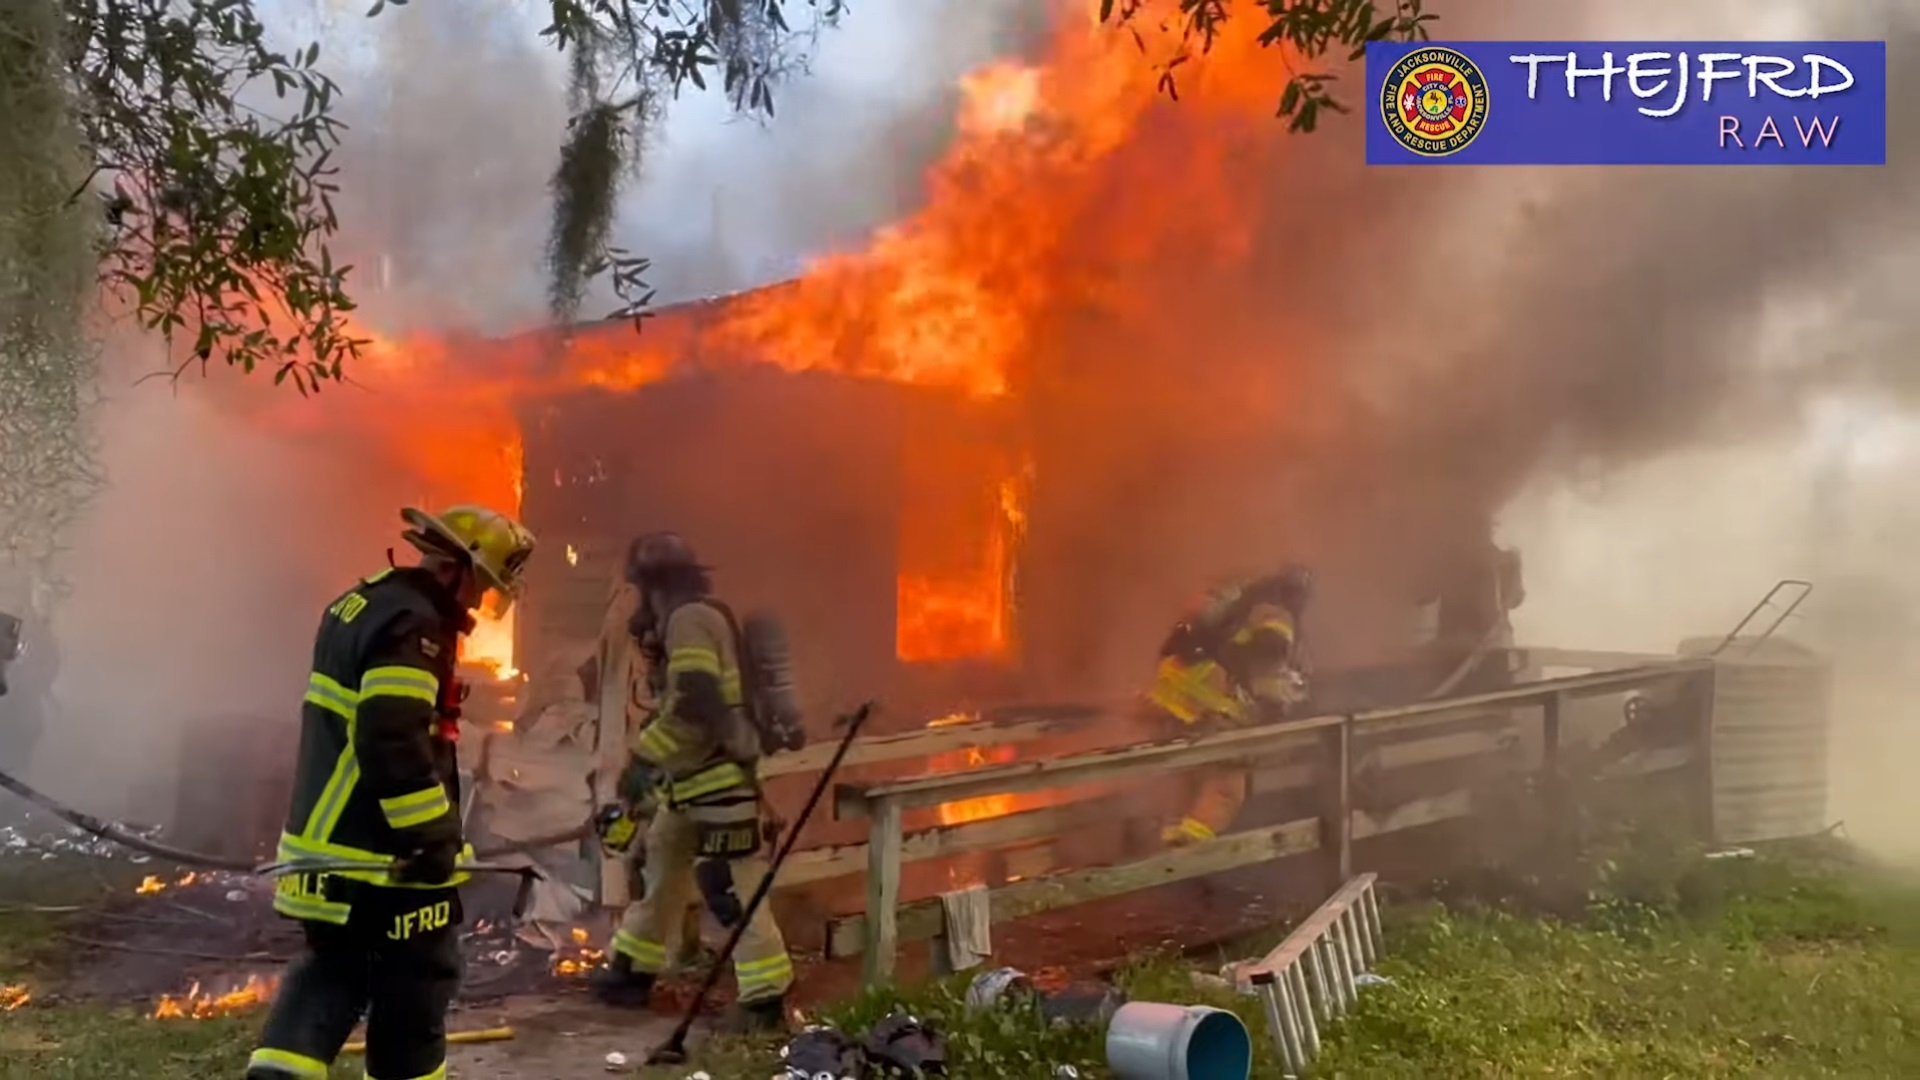 Video: Florida house fire with four firefighters hurt